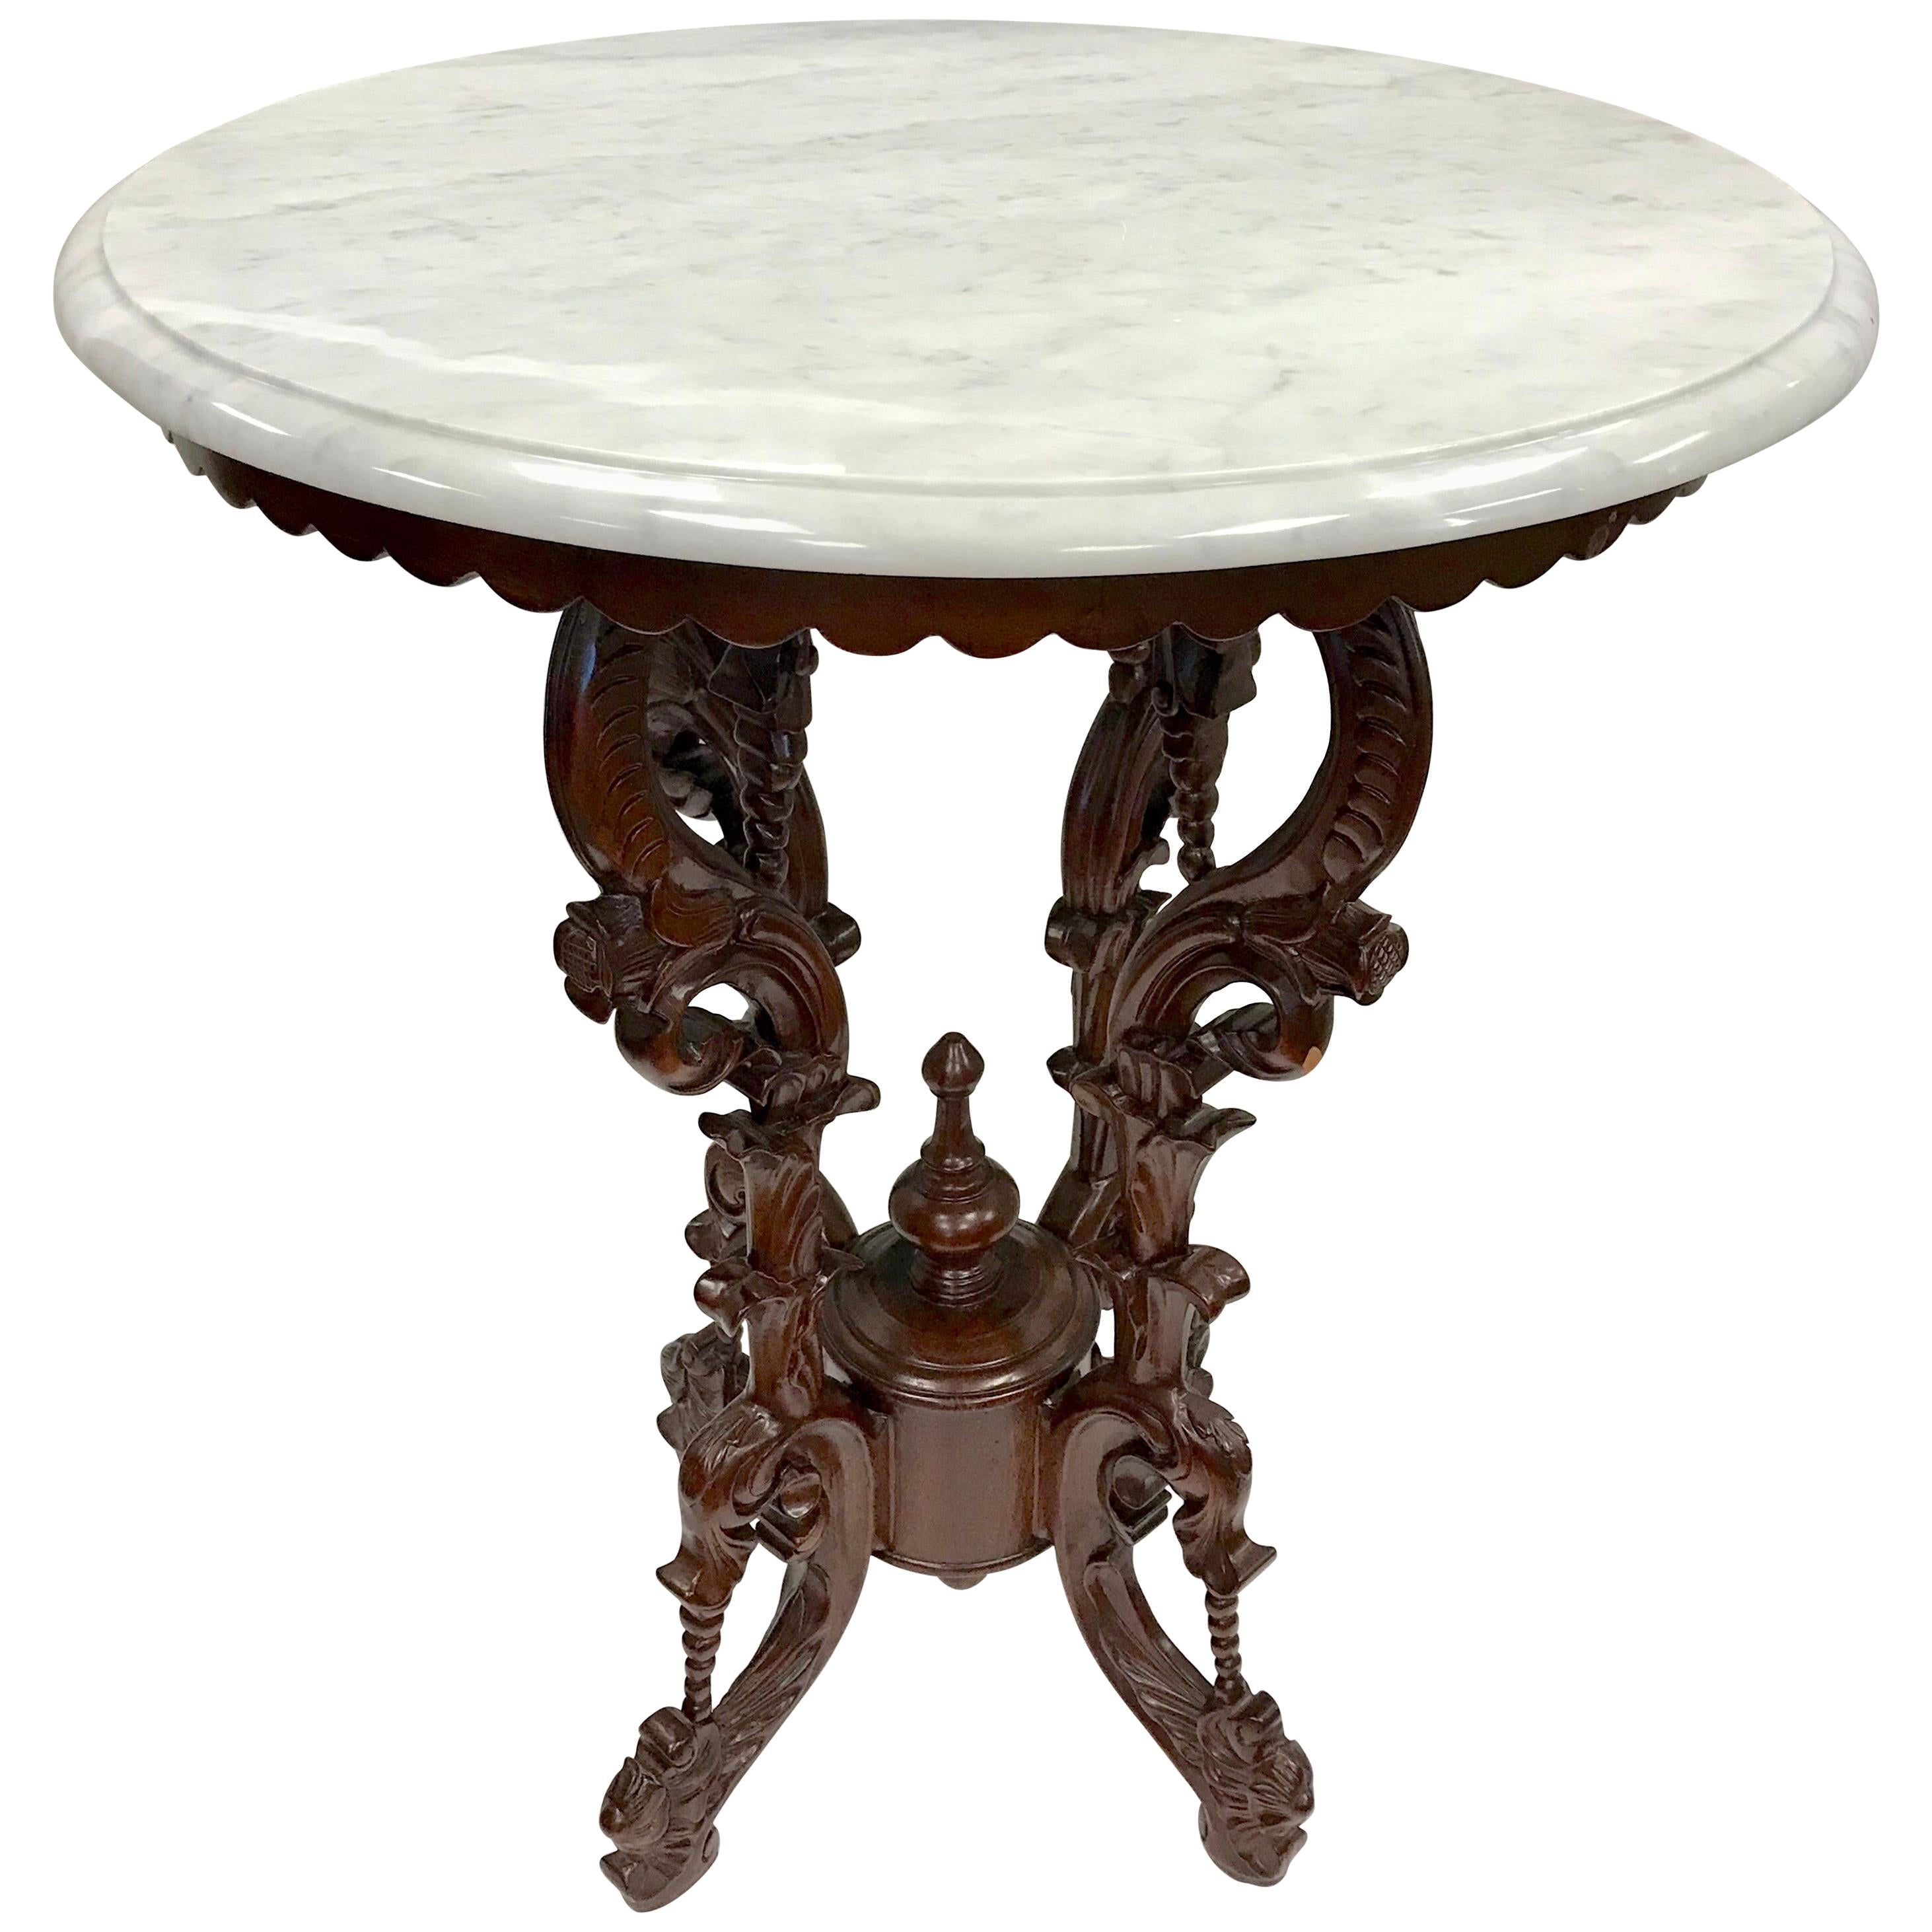 Victorian Carved Mahogany Marble-Top Round Table